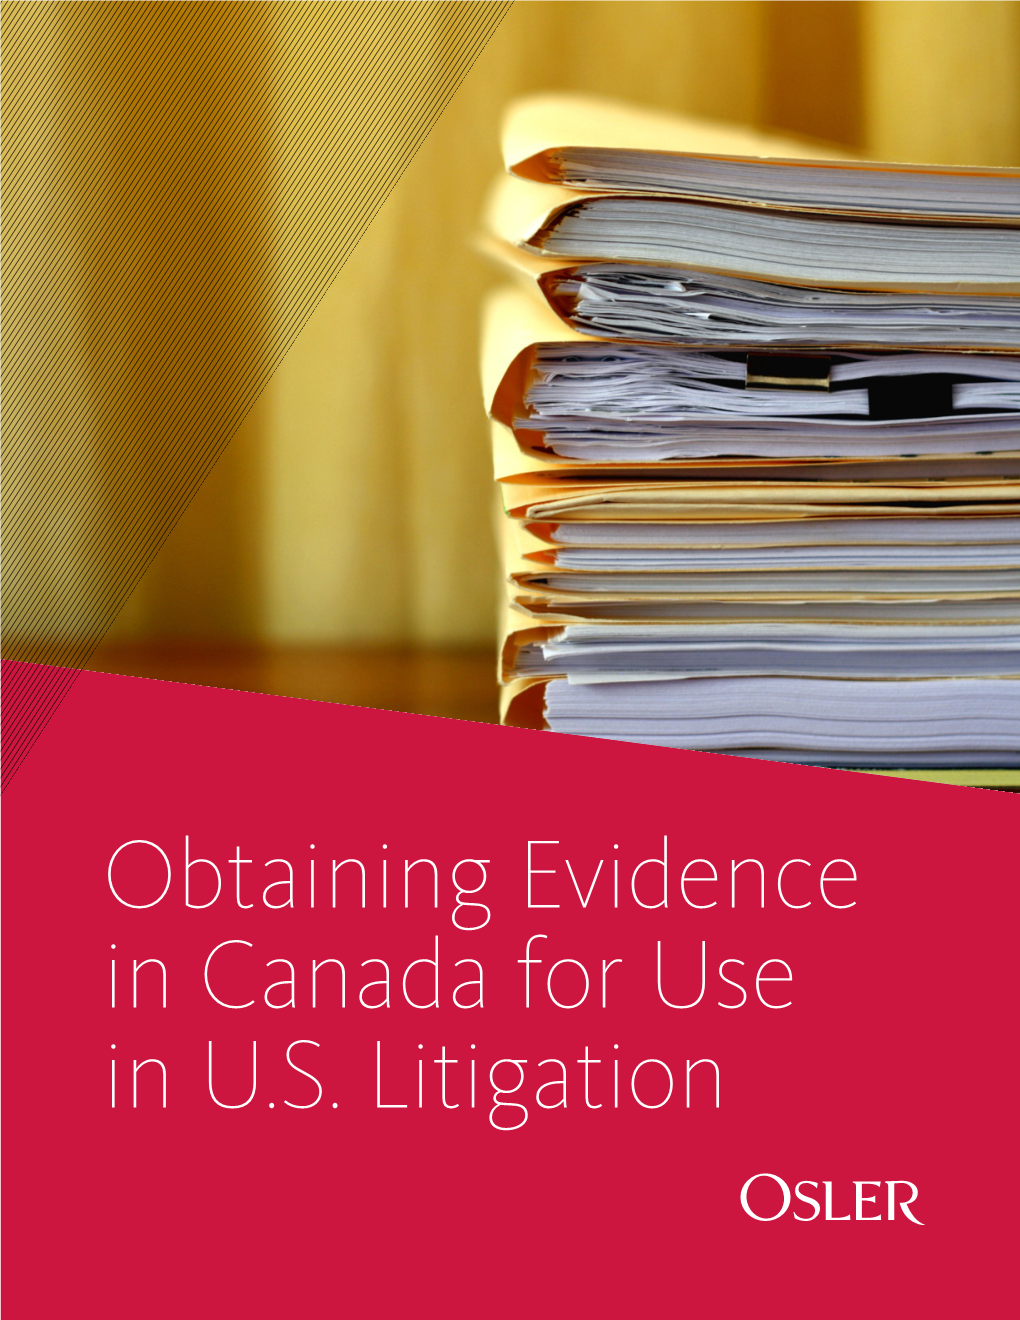 Obtaining Evidence in Canada for Use in U.S. Litigation OBTAINING EVIDENCE in CANADA for USE in U.S